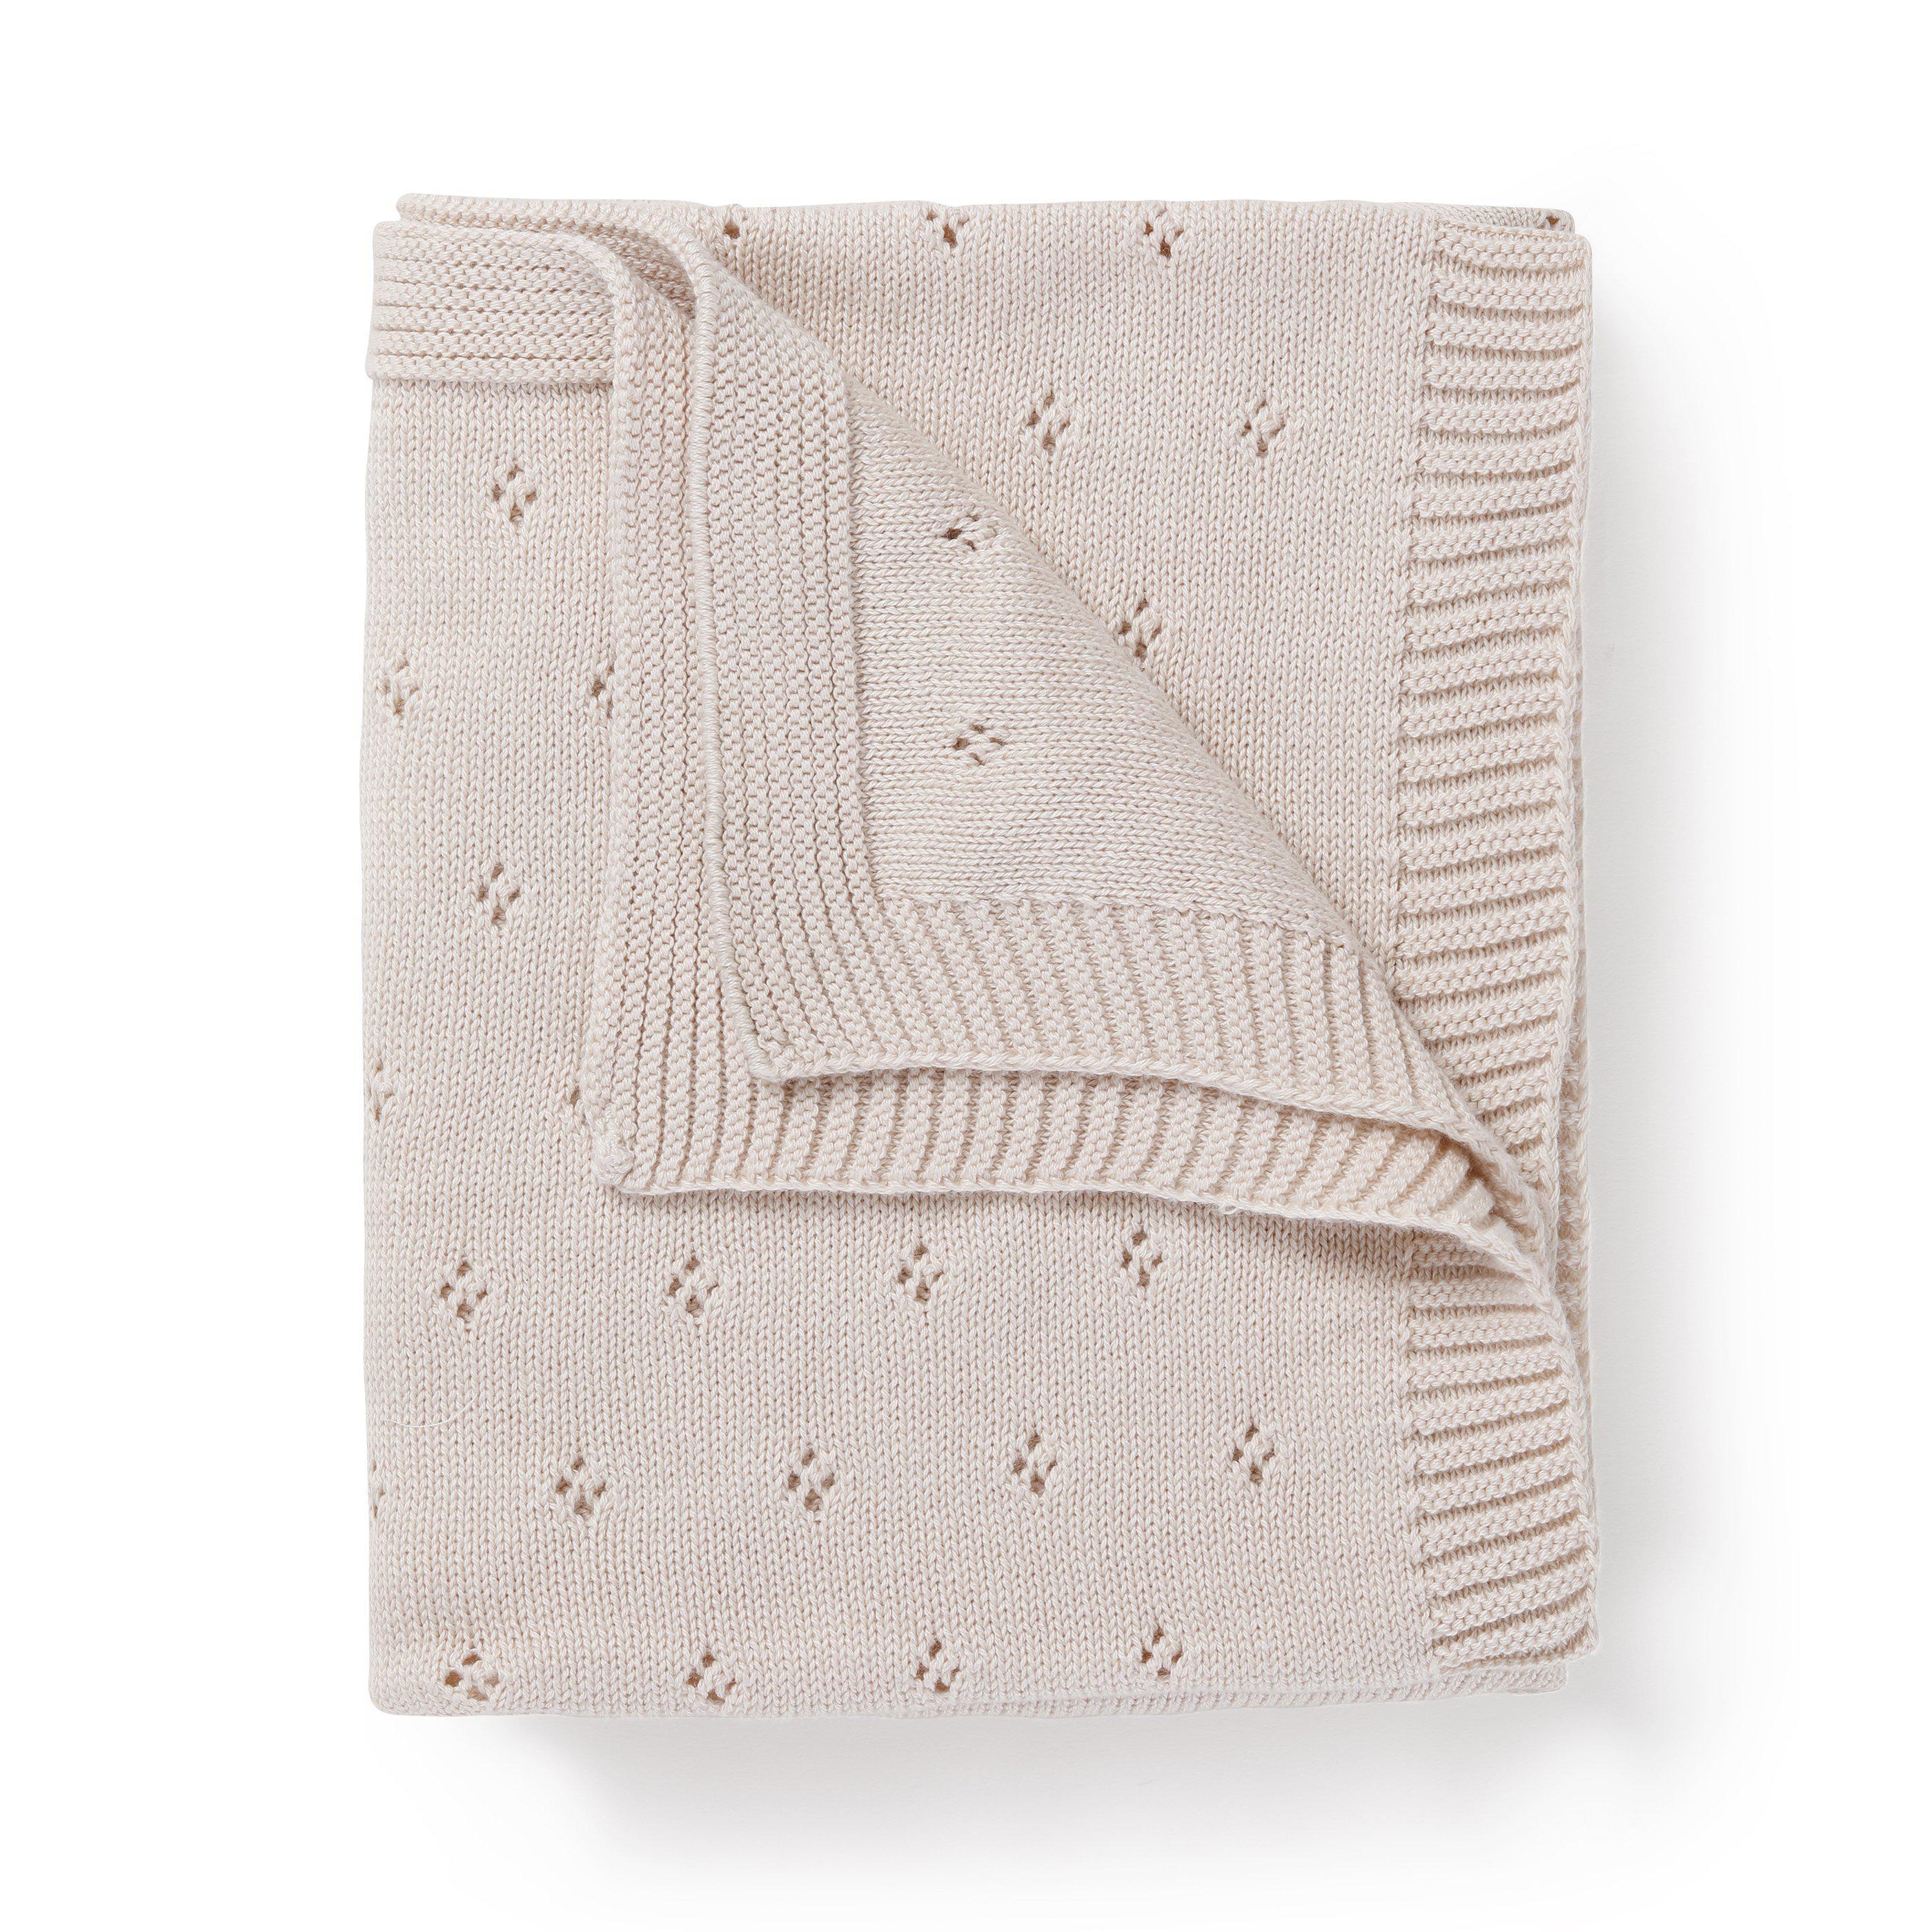 A folded Organic Cotton Pointelle Baby Blanket in Nora Shell with a delicate pattern of small diamonds and a ribbed border, isolated on a white background by Makemake Organics.